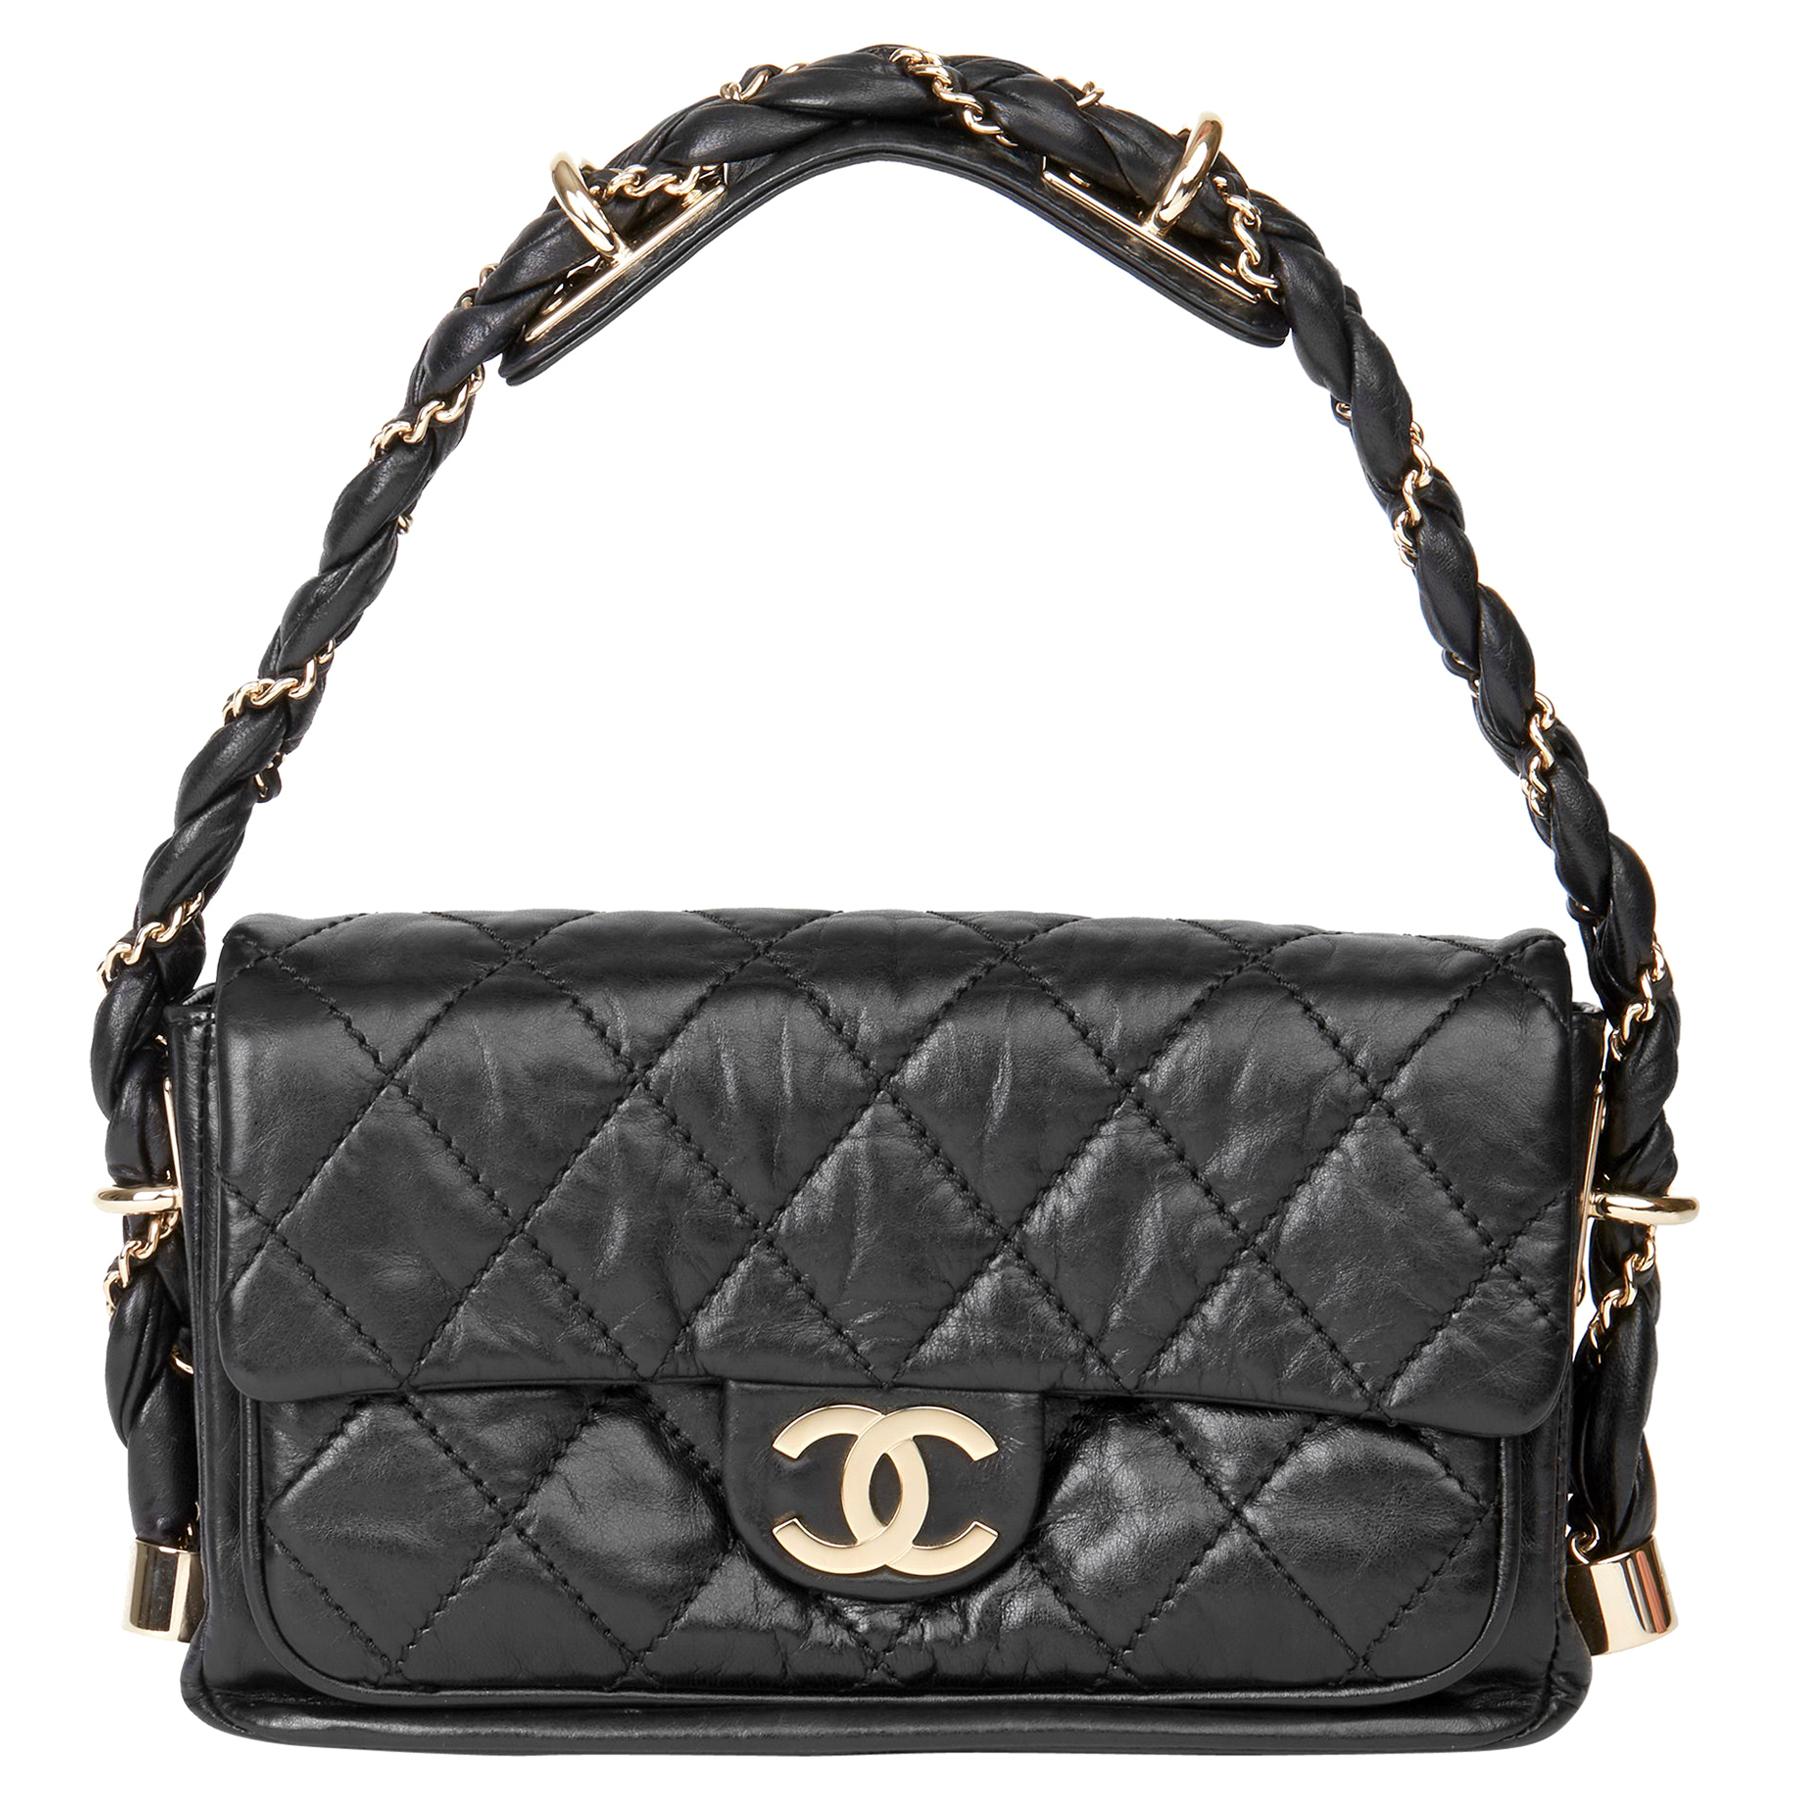 2006 Chanel Black Quilted Aged Calfskin Leather Classic Single Flap Bag